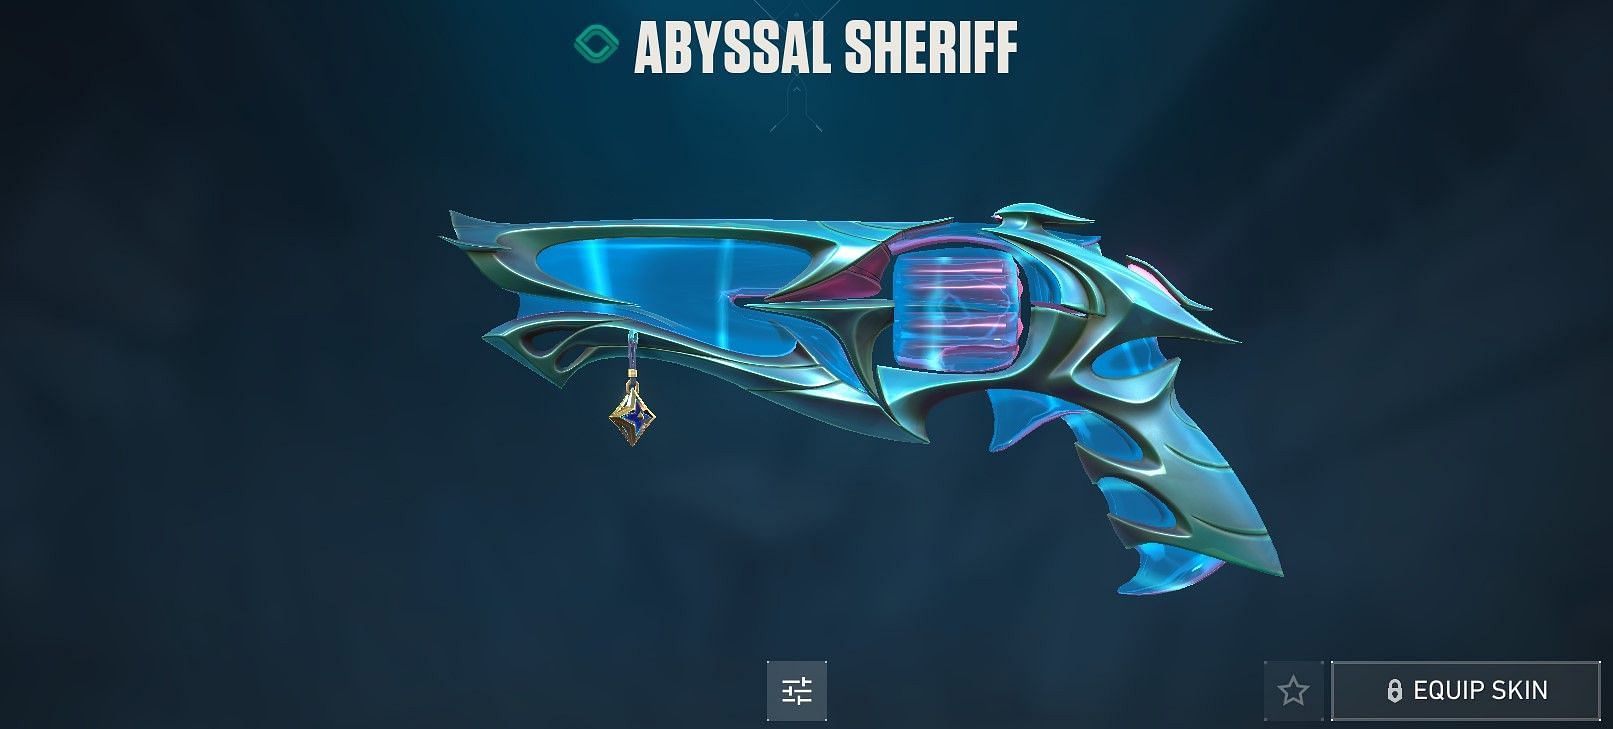 Abyssal Sheriff (Image via Riot Games)